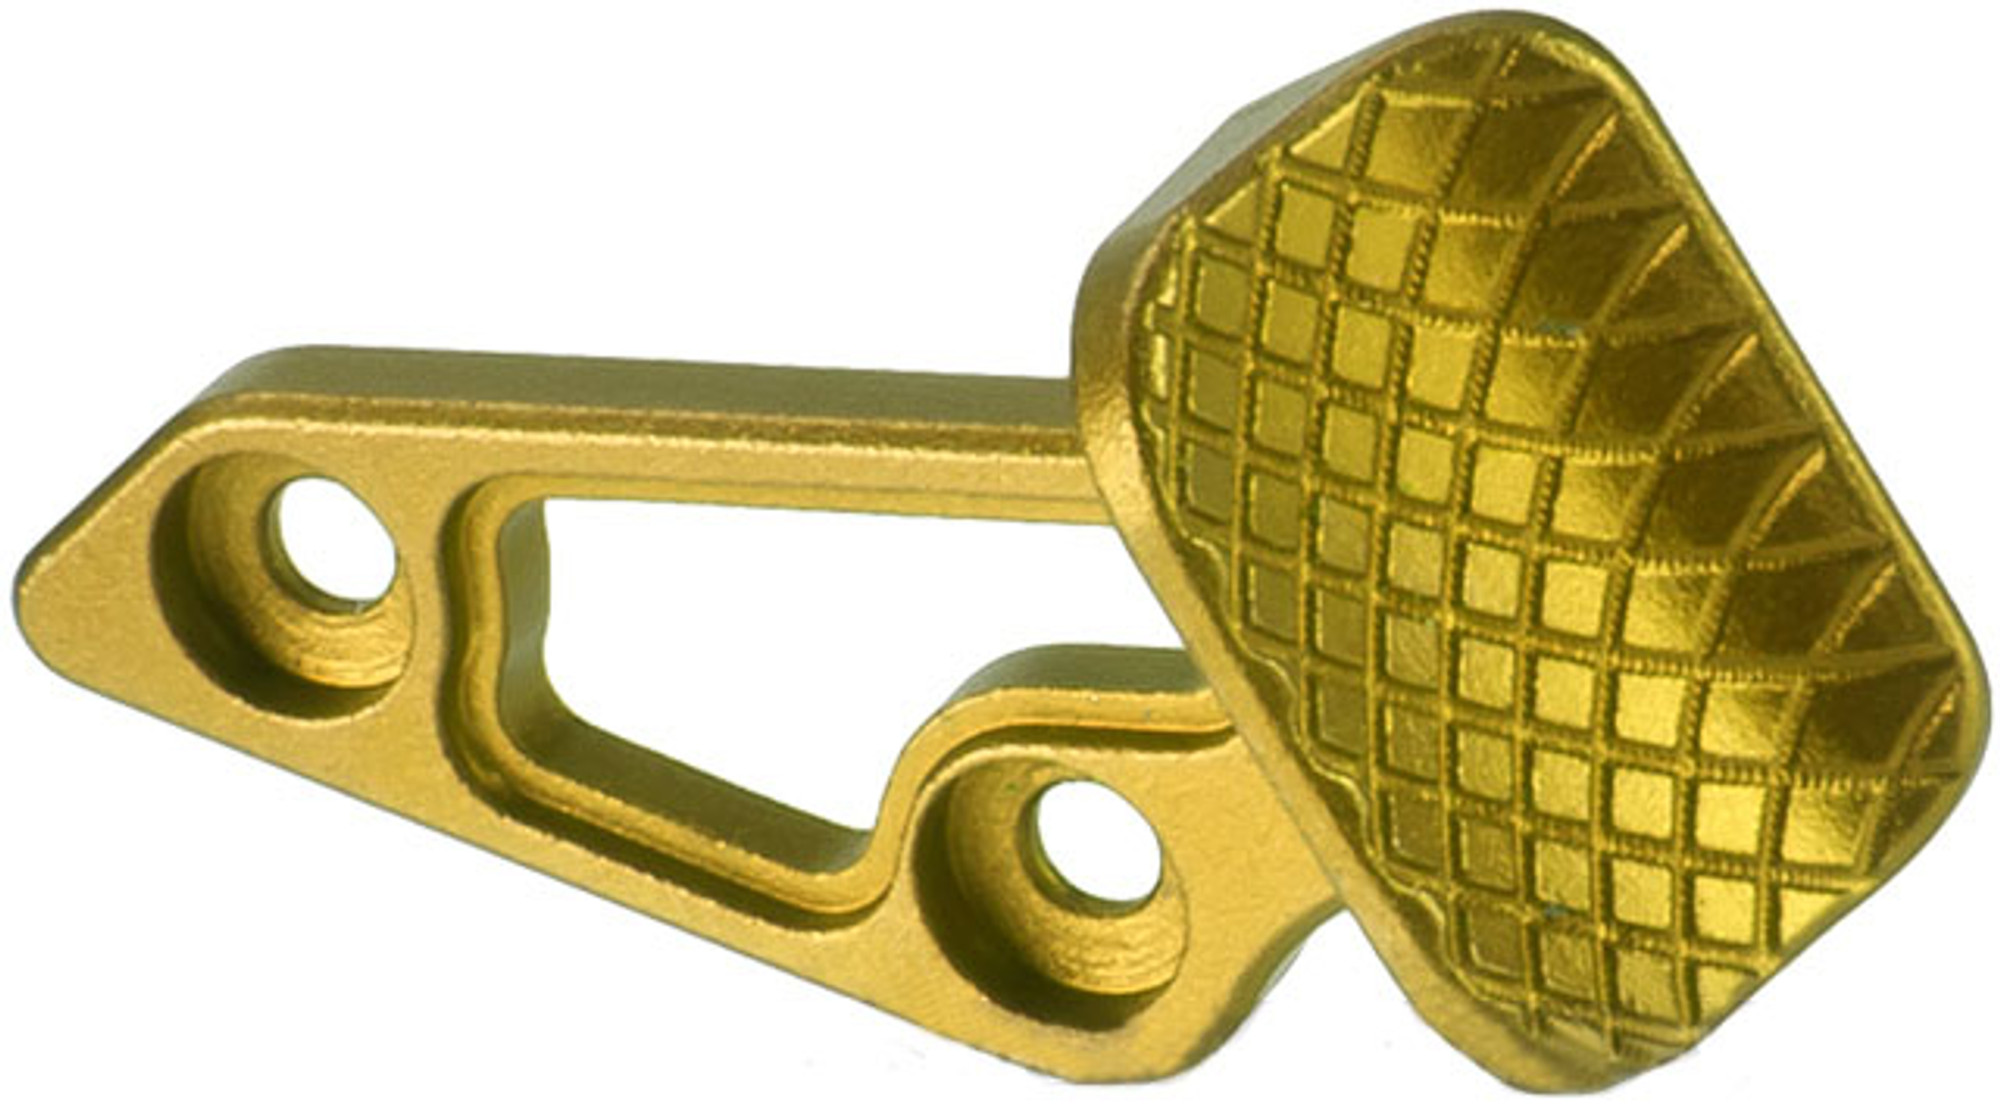 5KU Skidproof Thumb Rest for Tokyo Marui Hi-Capa Gas Powered Airsoft Pistols - Gold (Left Hand Version)